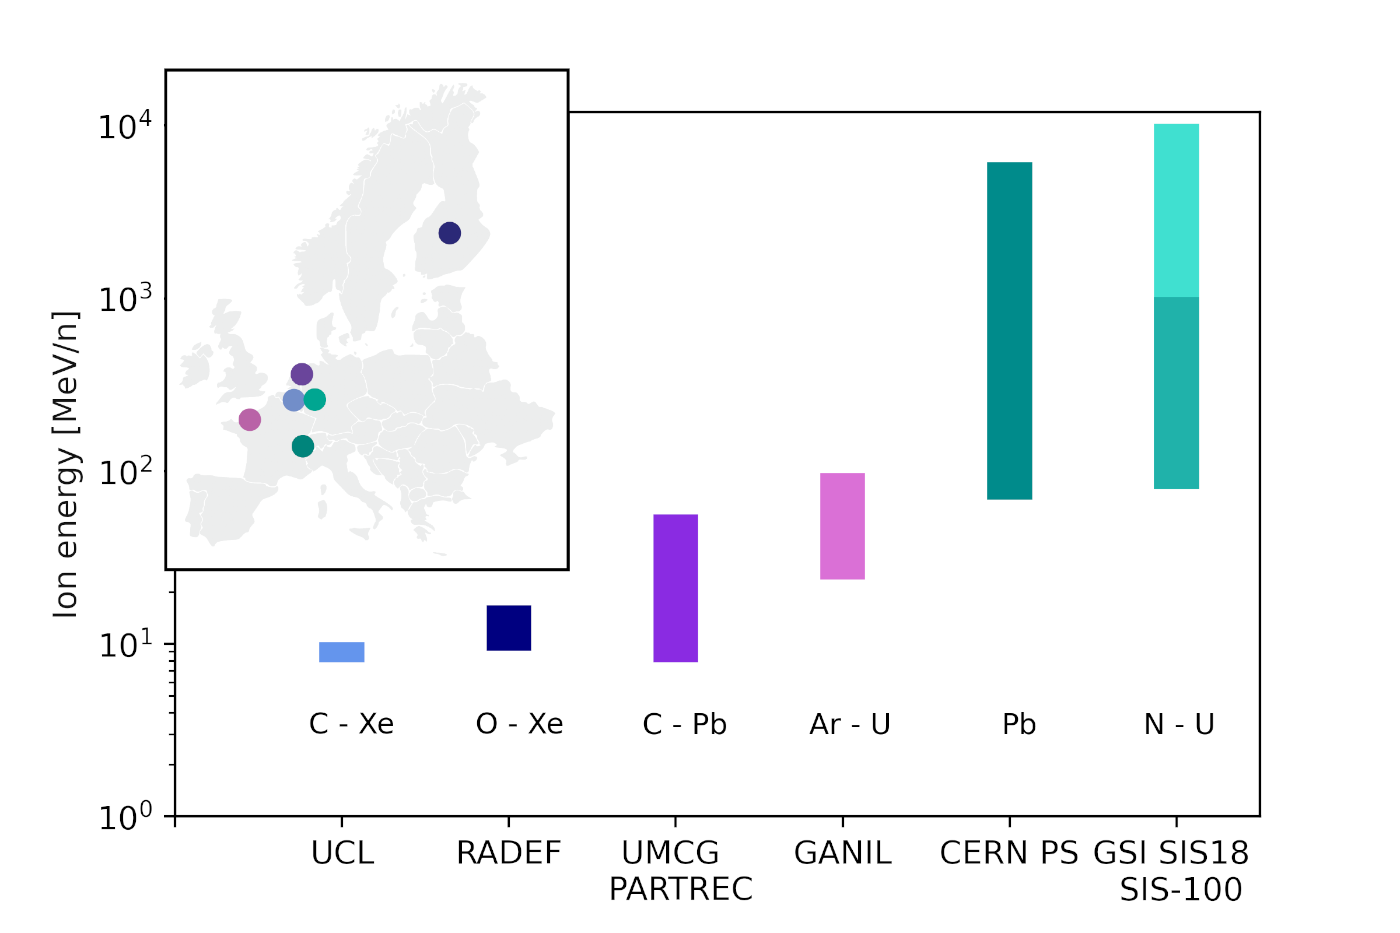 Figure 3.: Overview of the European ion beam infrastructure capacity after the HEARTS project